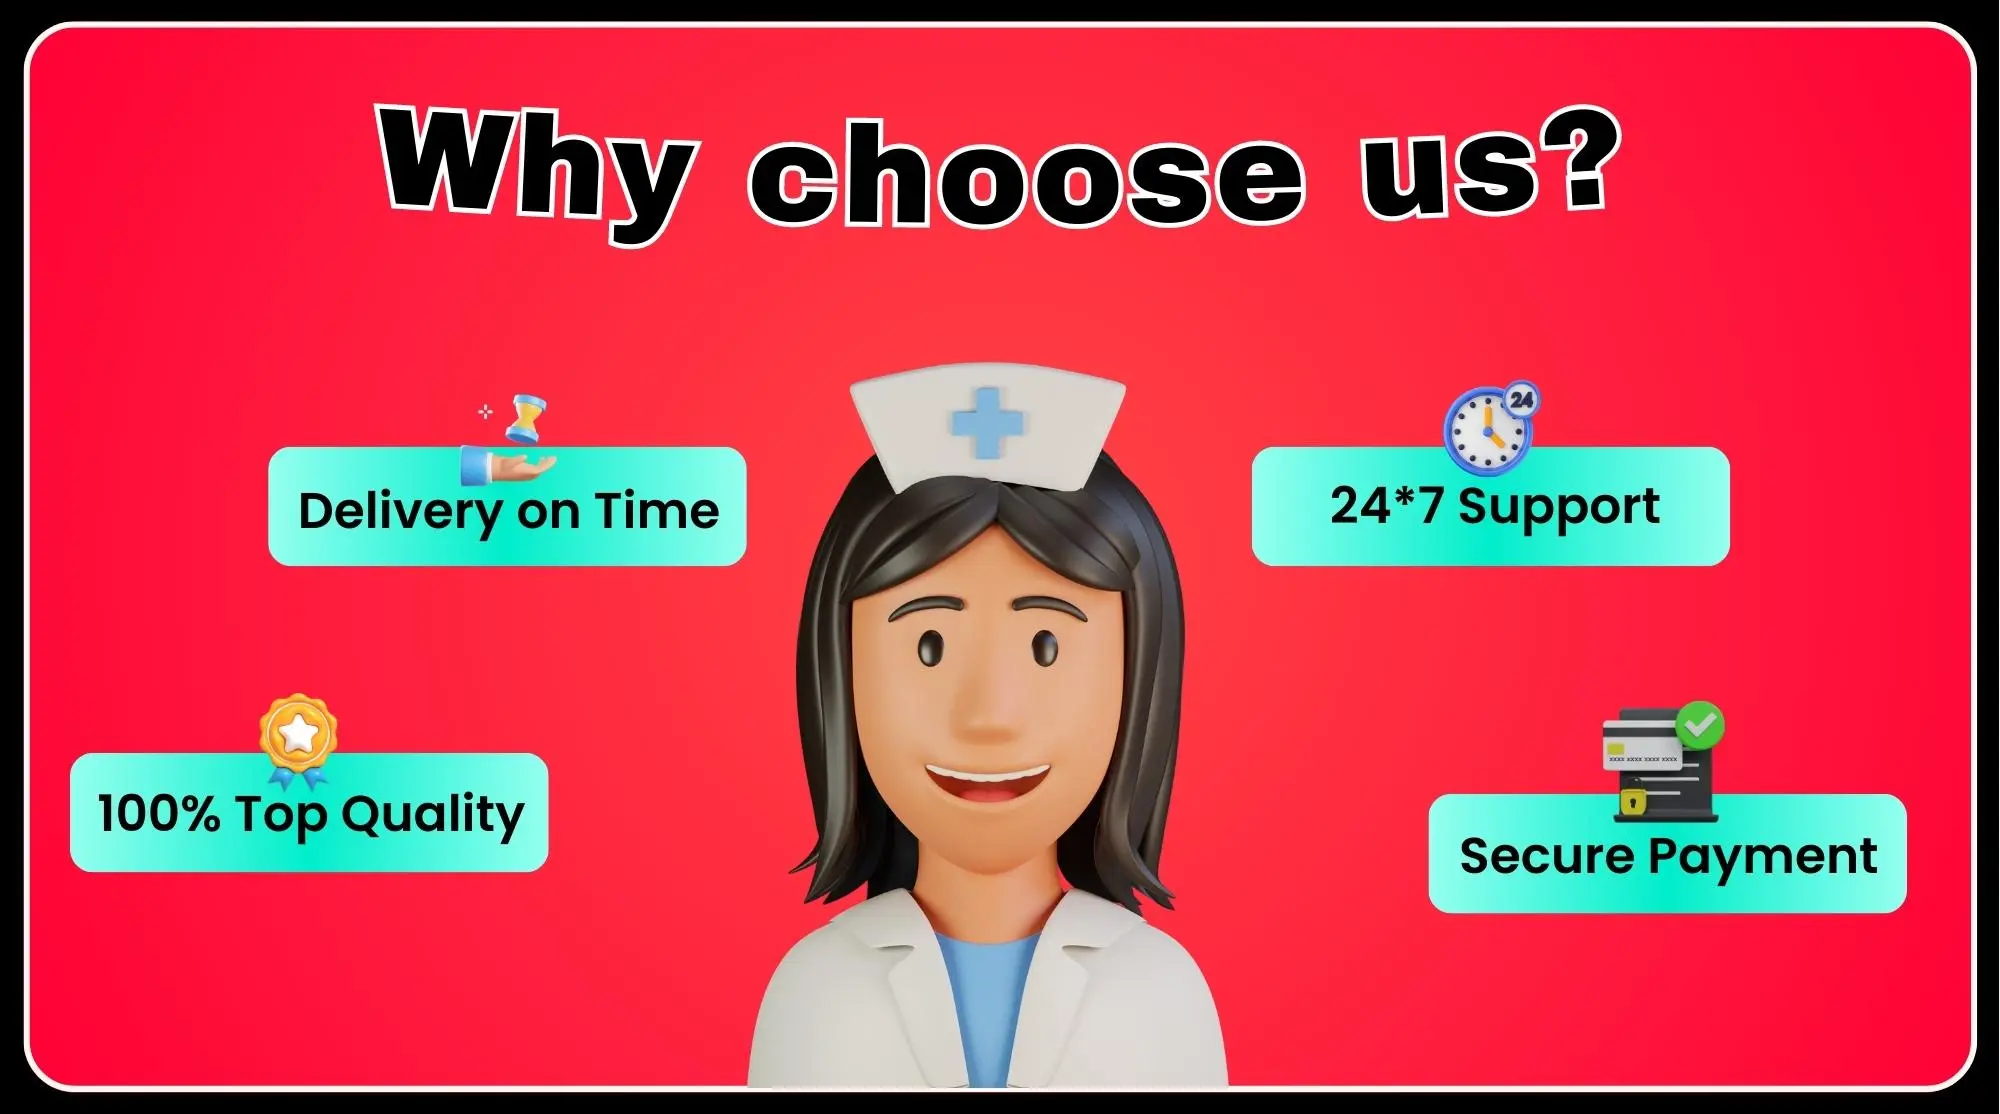 Why Choose Us - Nursing Assignment Help - 100% Top Quality - 24*7 Support - Delivery on Time - Secure Payment